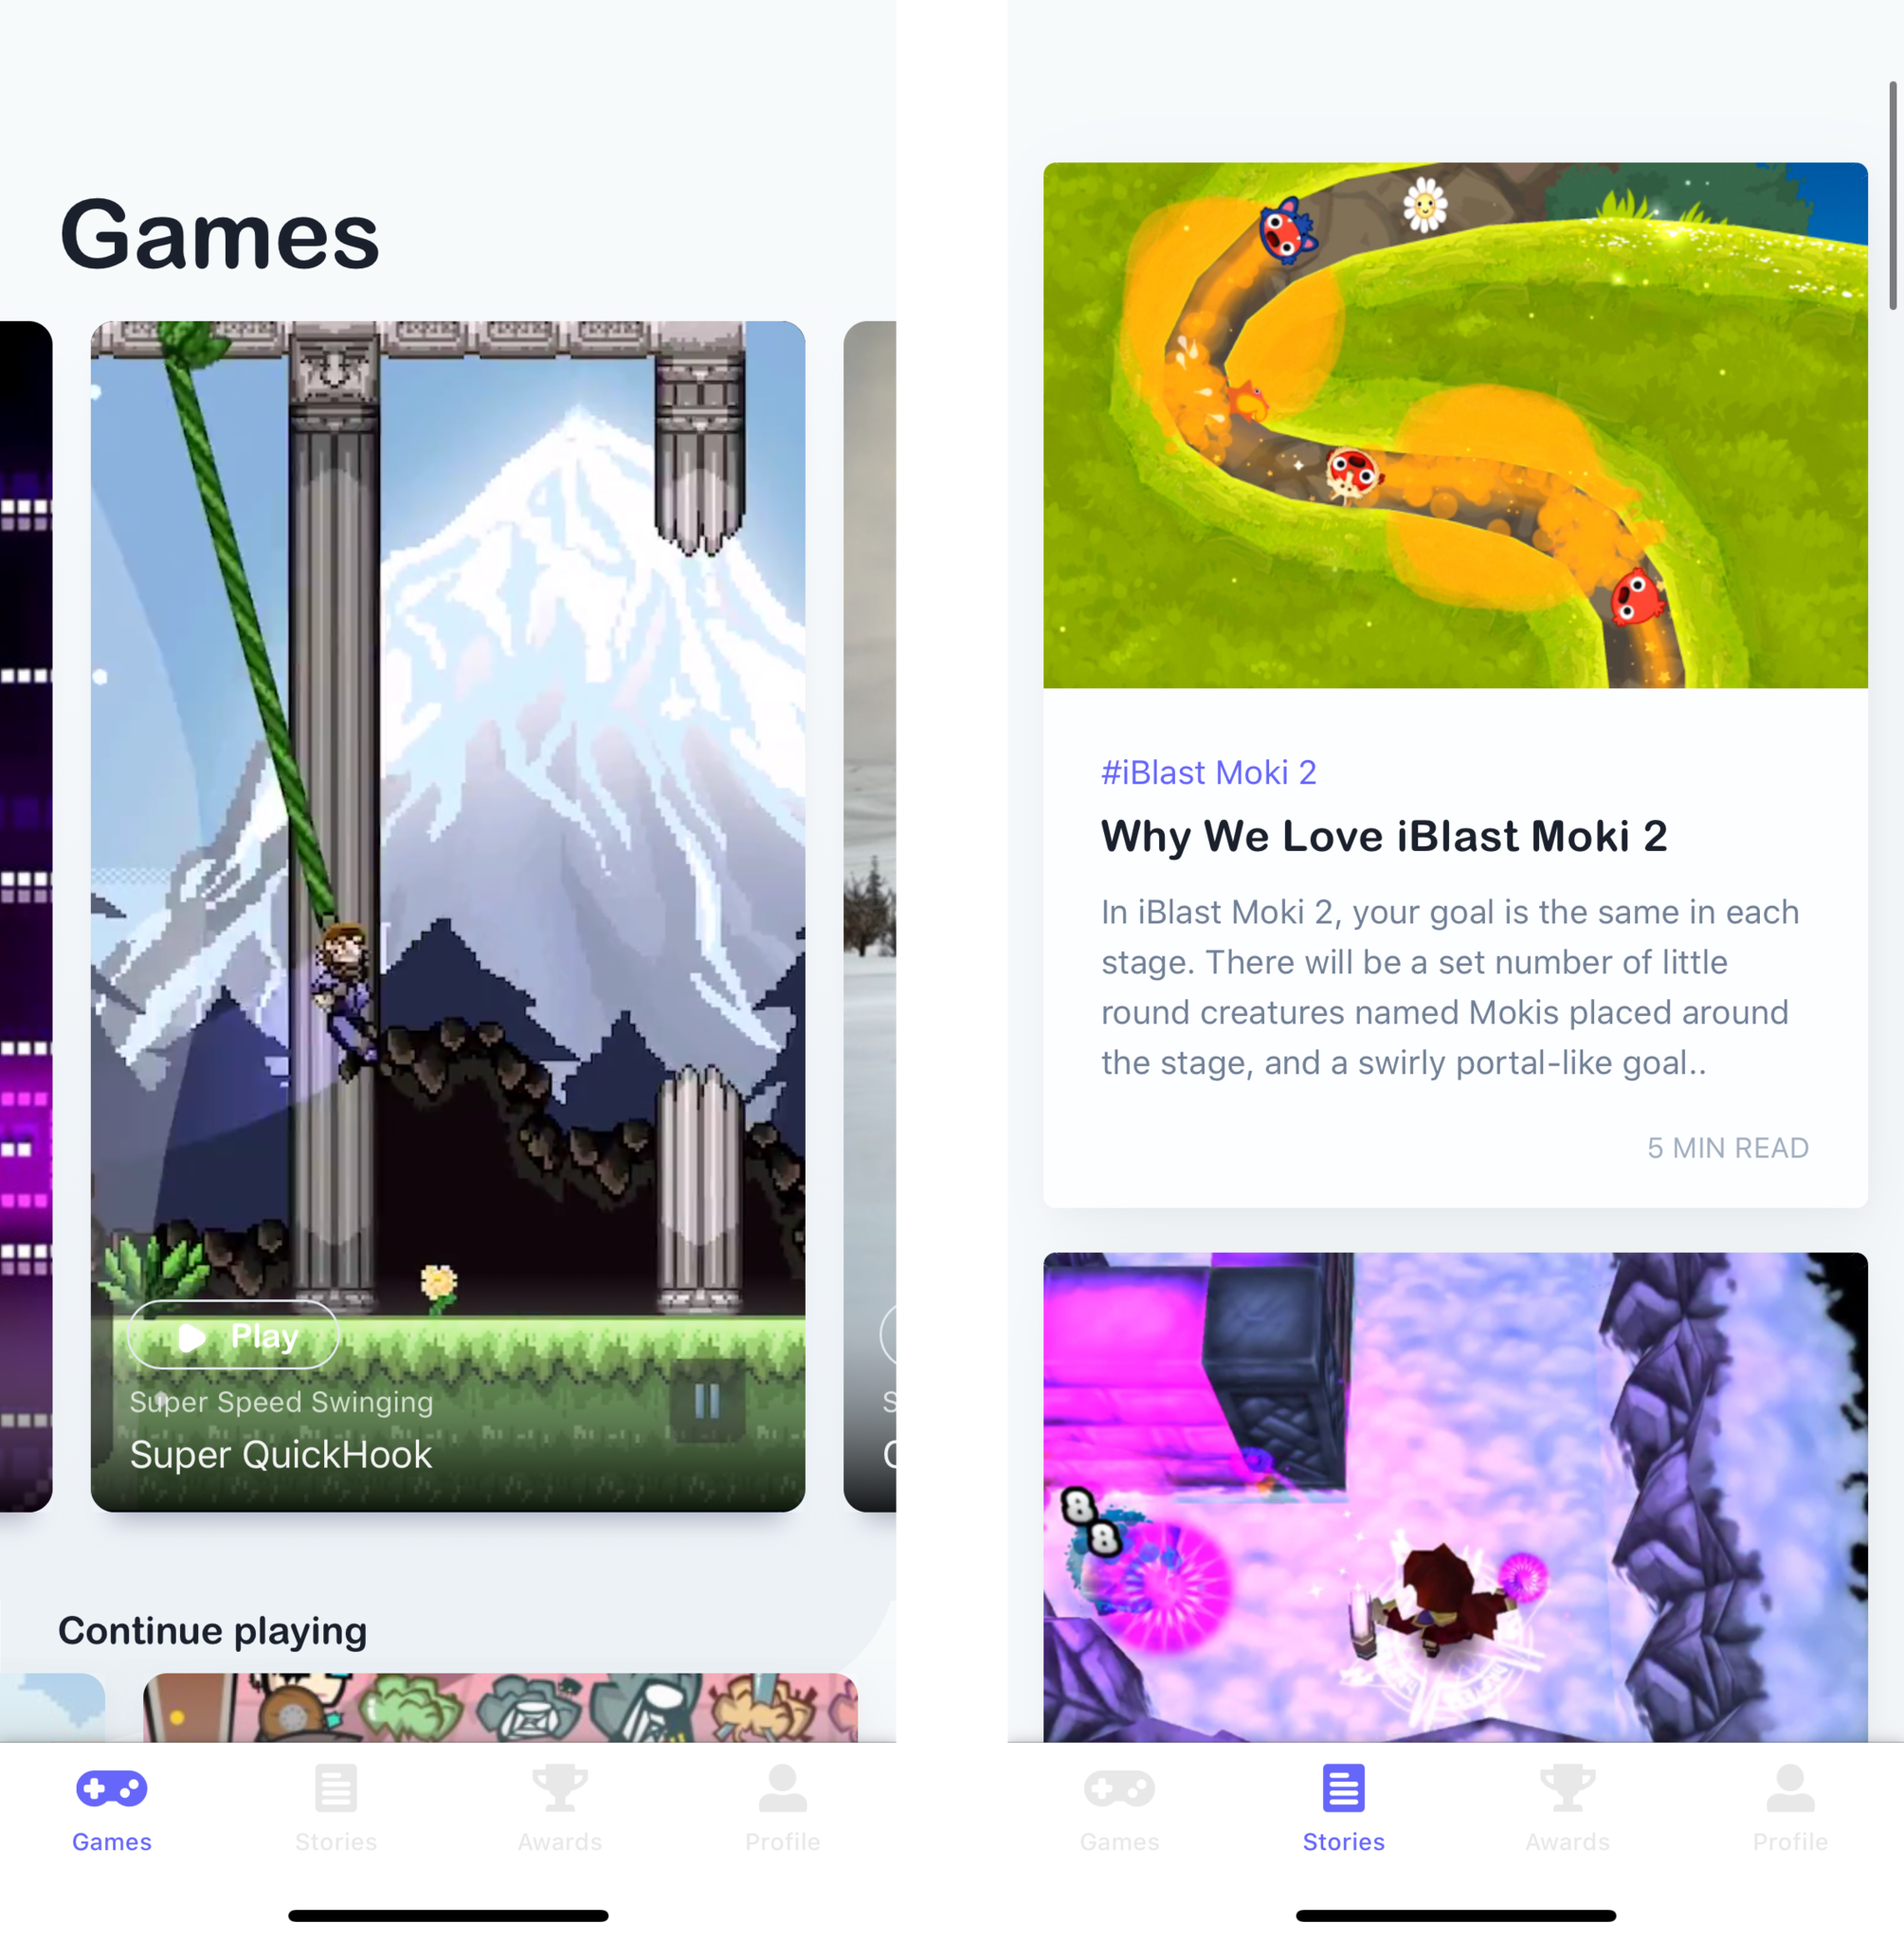 Games and Stories tabs in GameClub app